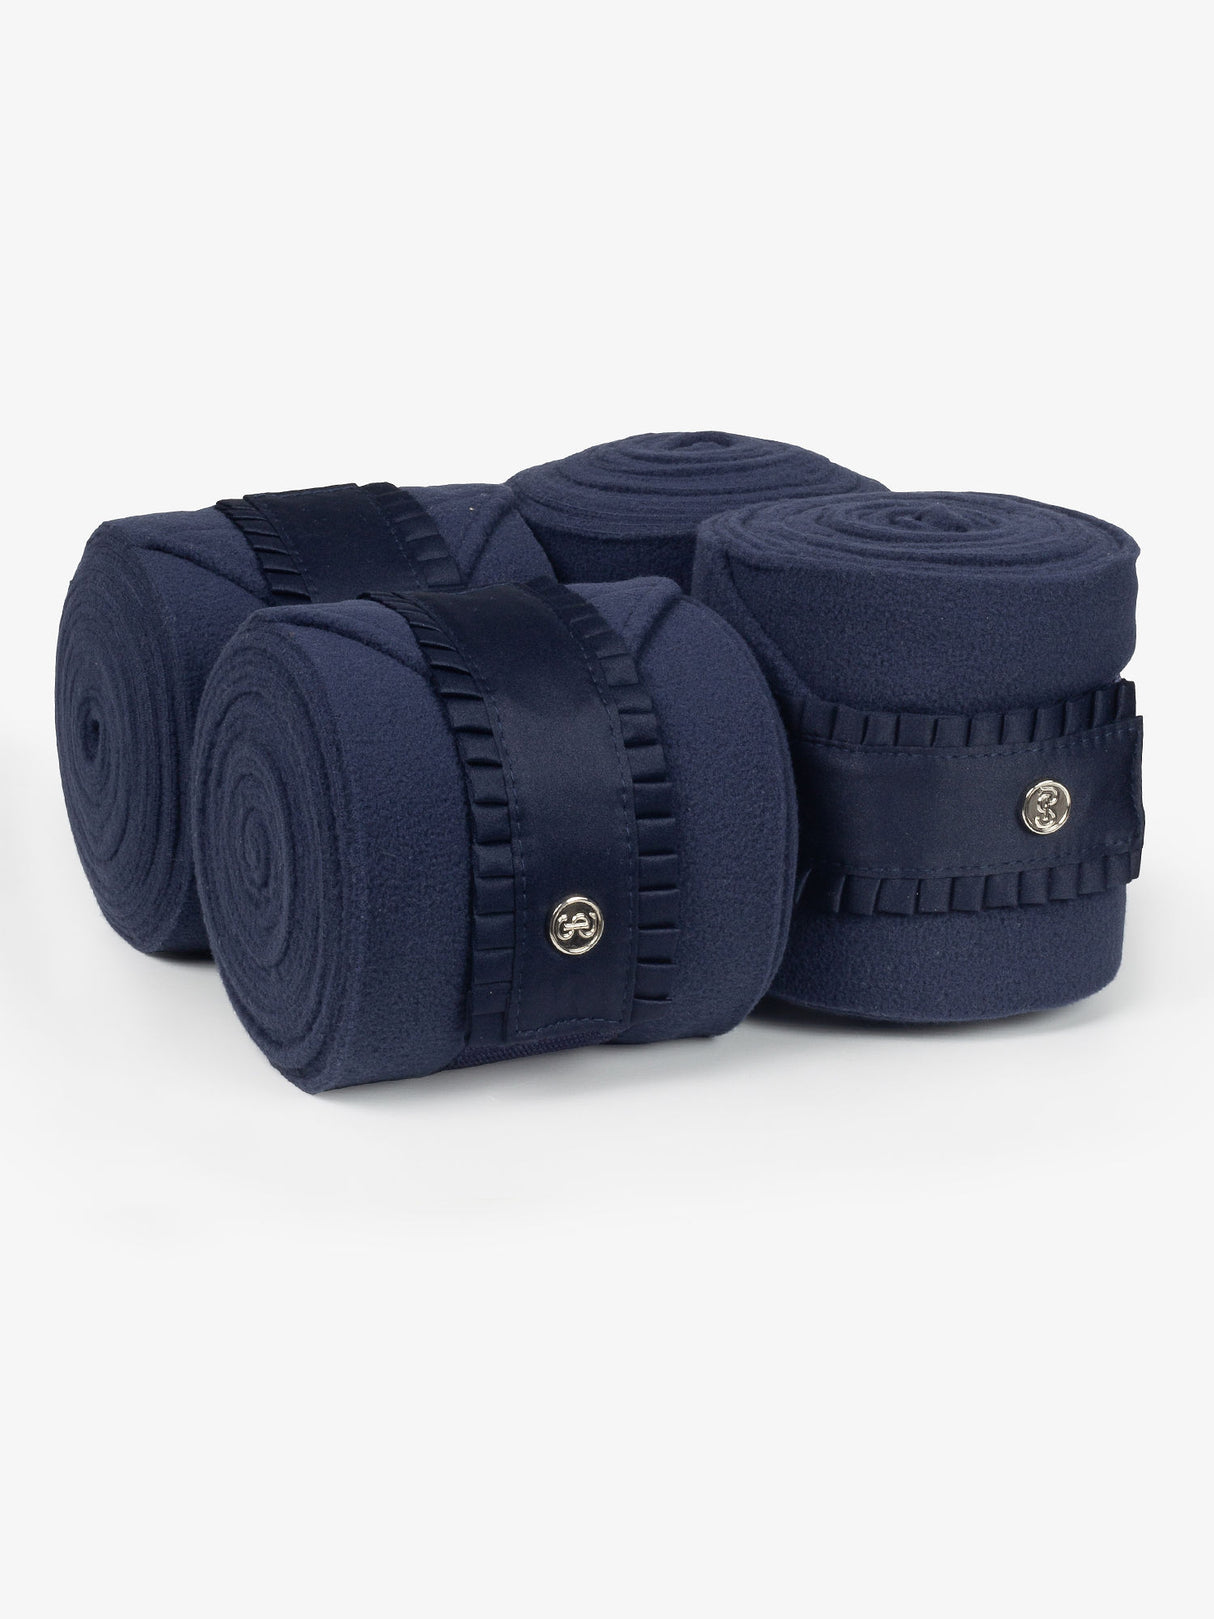 PS of Sweden Ruffle Bandages Navy